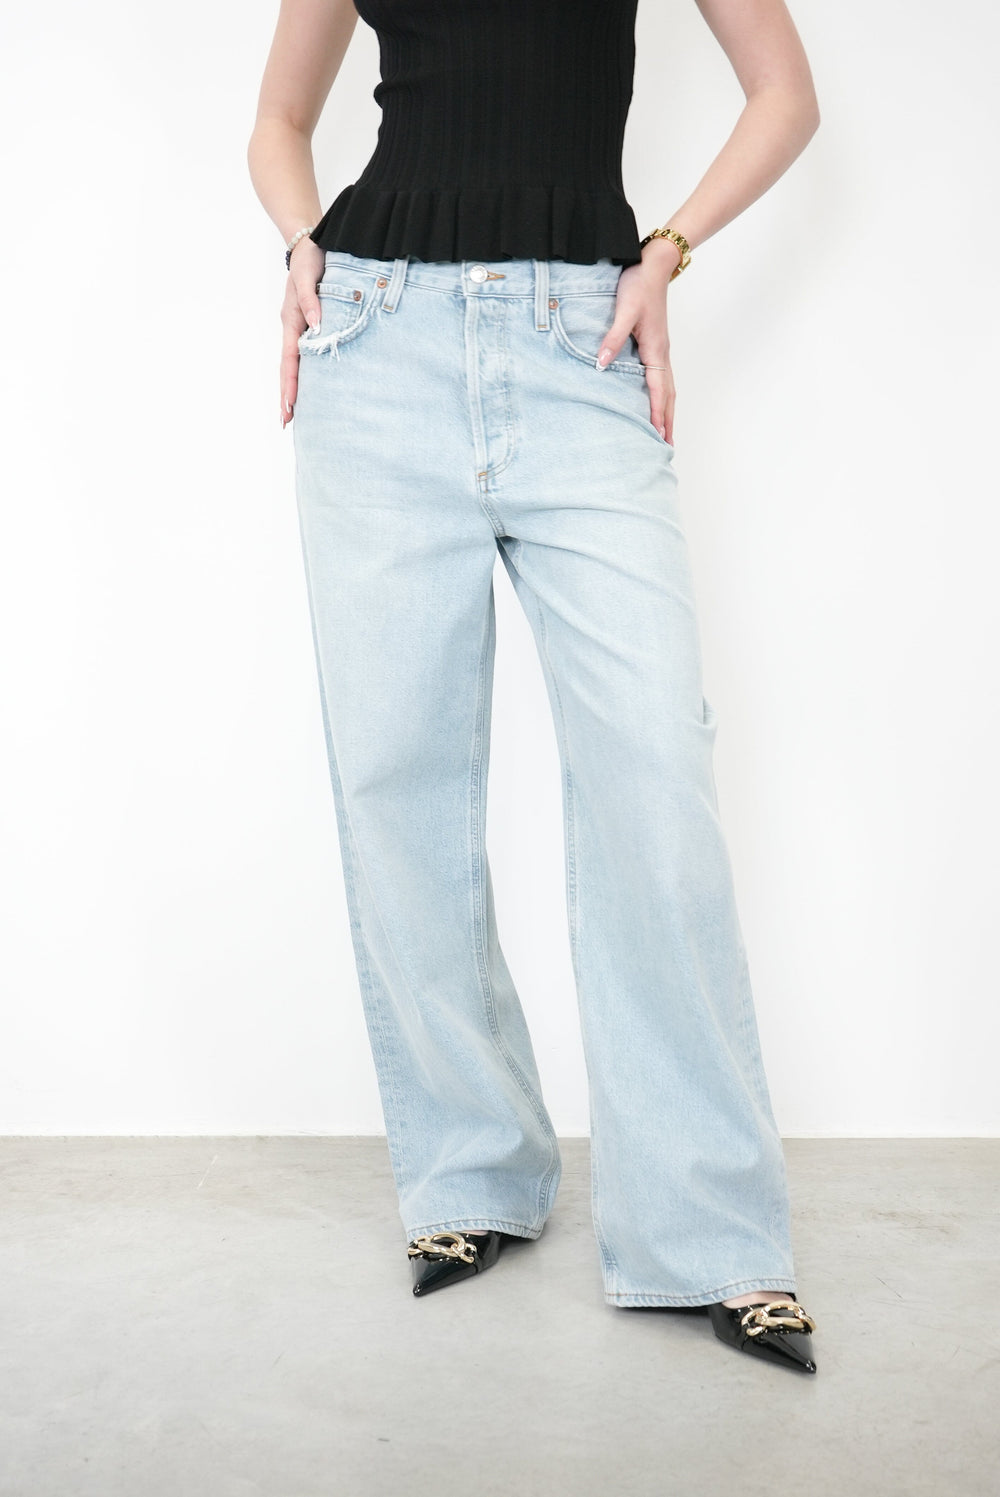 LOW SLUNG BAGGY JEANS IN SHAKE JEANS AGOLDE 